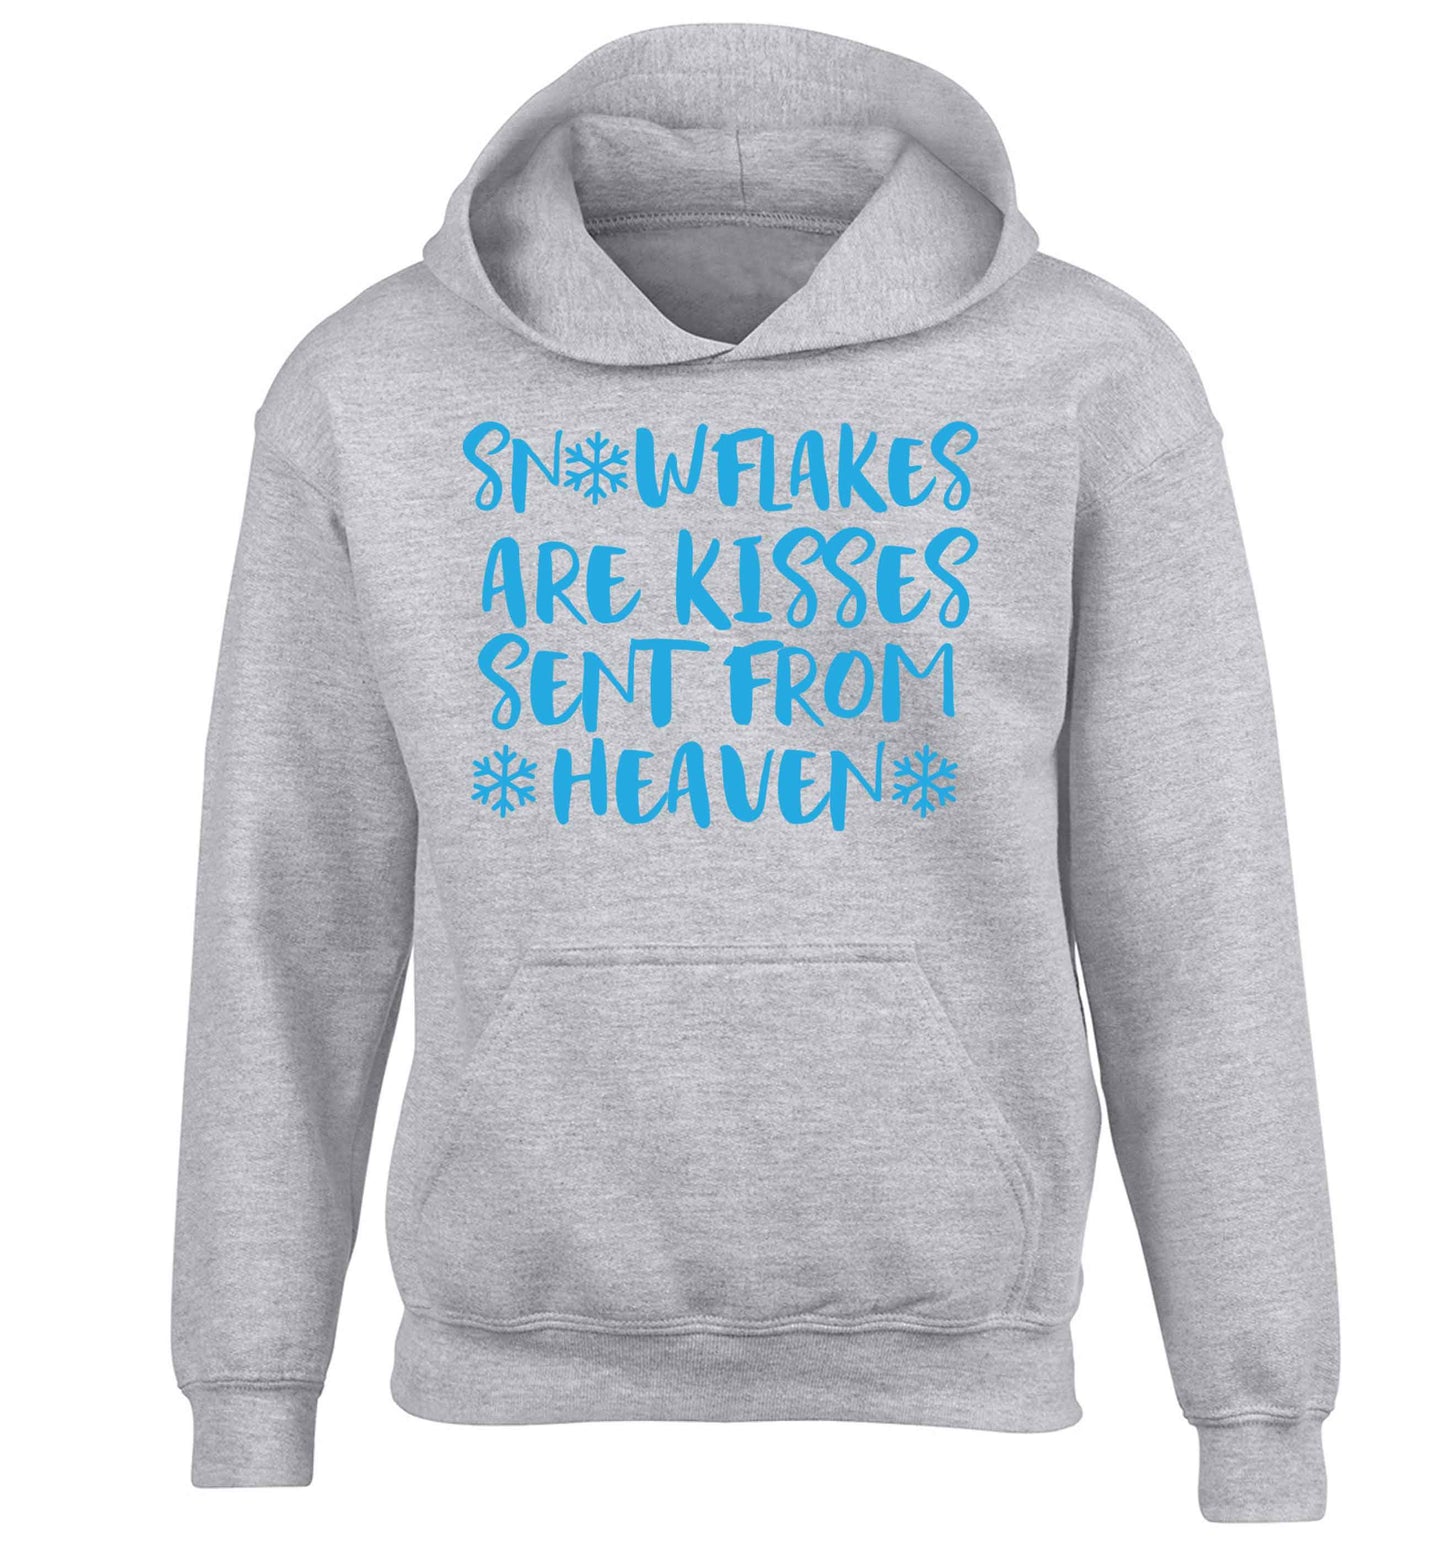 Snowflakes are kisses sent from heaven children's grey hoodie 12-13 Years